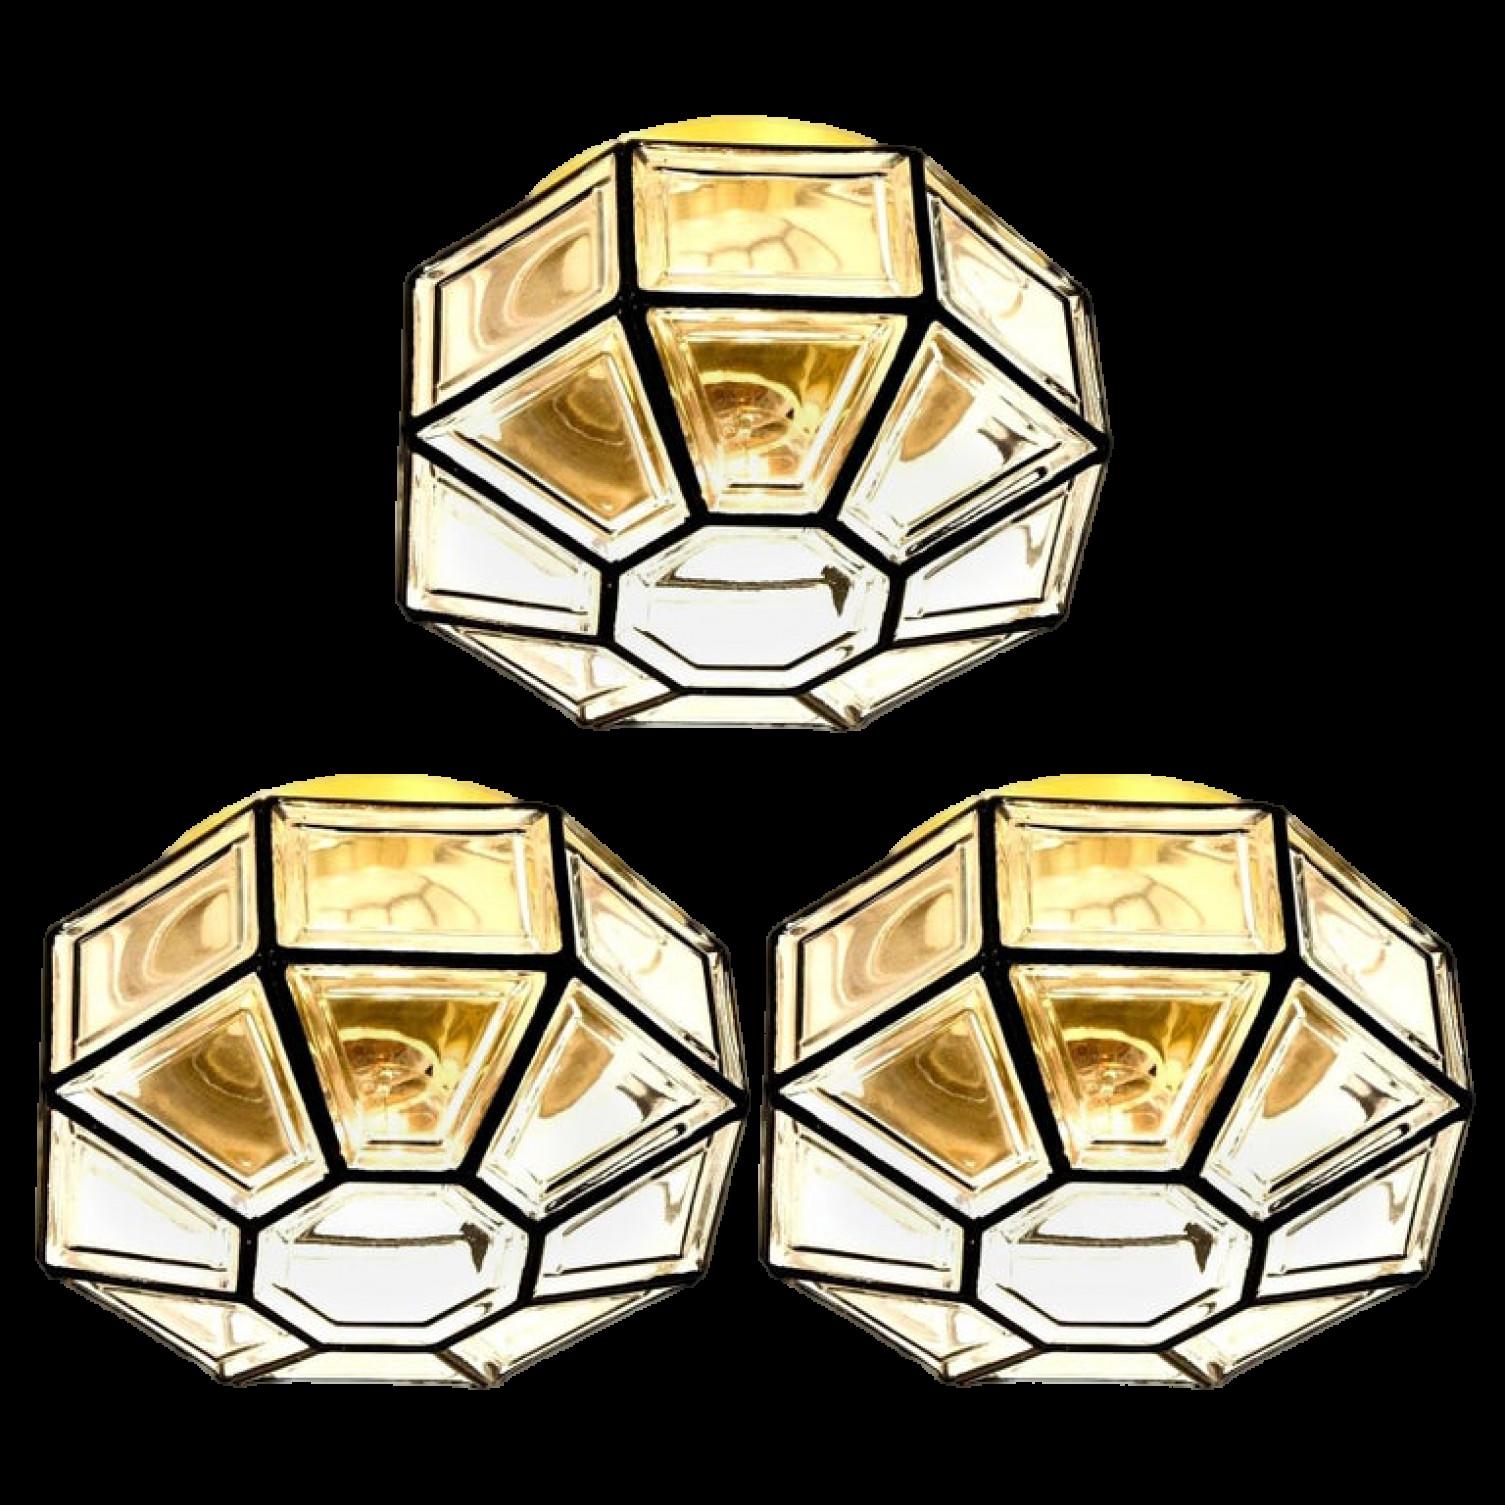 One of the three beautiful set octagonal glass light flush mounts or wall lights were manufactured by Glashütte Limburg in Germany during the 1970s. Beautiful craftsmanship. Illuminates beautifully.

Please note the price is for one-piece. Three